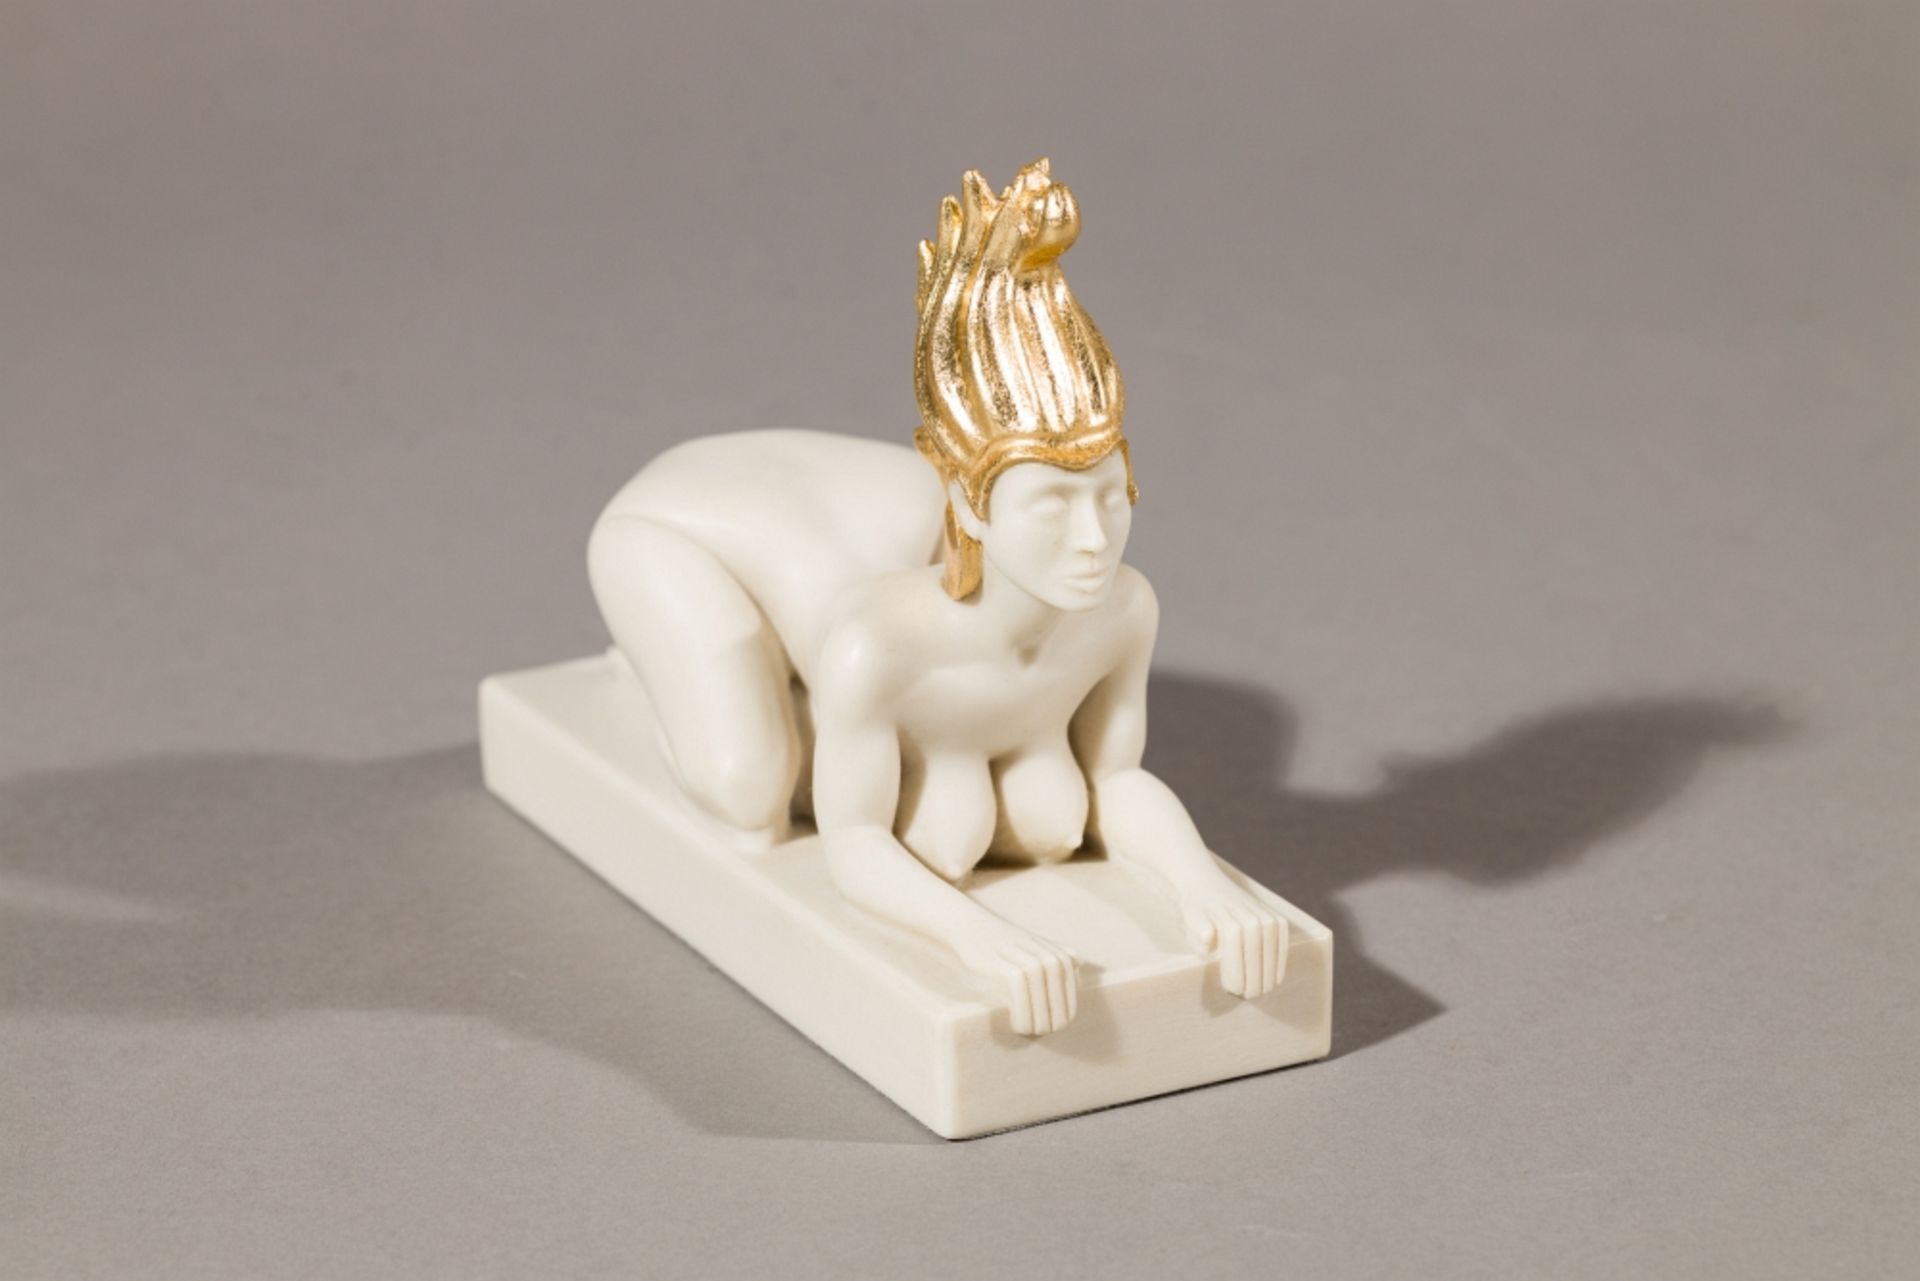 Fuchs, Ernst (1930 - 2015) Vienna Sphinx, 2013 Polymeric Art Casting, pratially Gold-Plated Signed